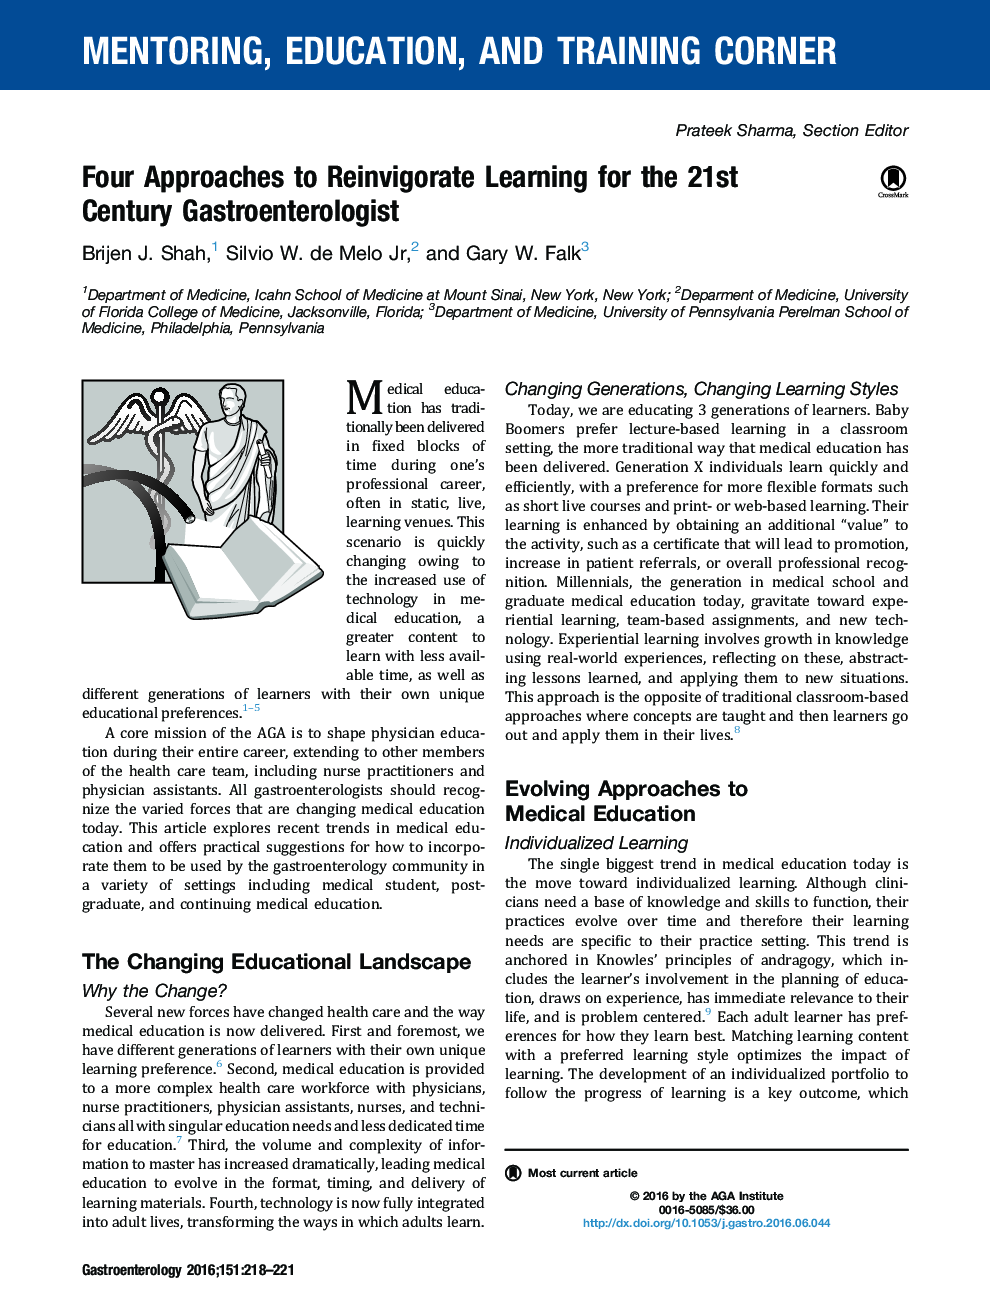 Four Approaches to Reinvigorate Learning for the 21st CenturyÂ Gastroenterologist